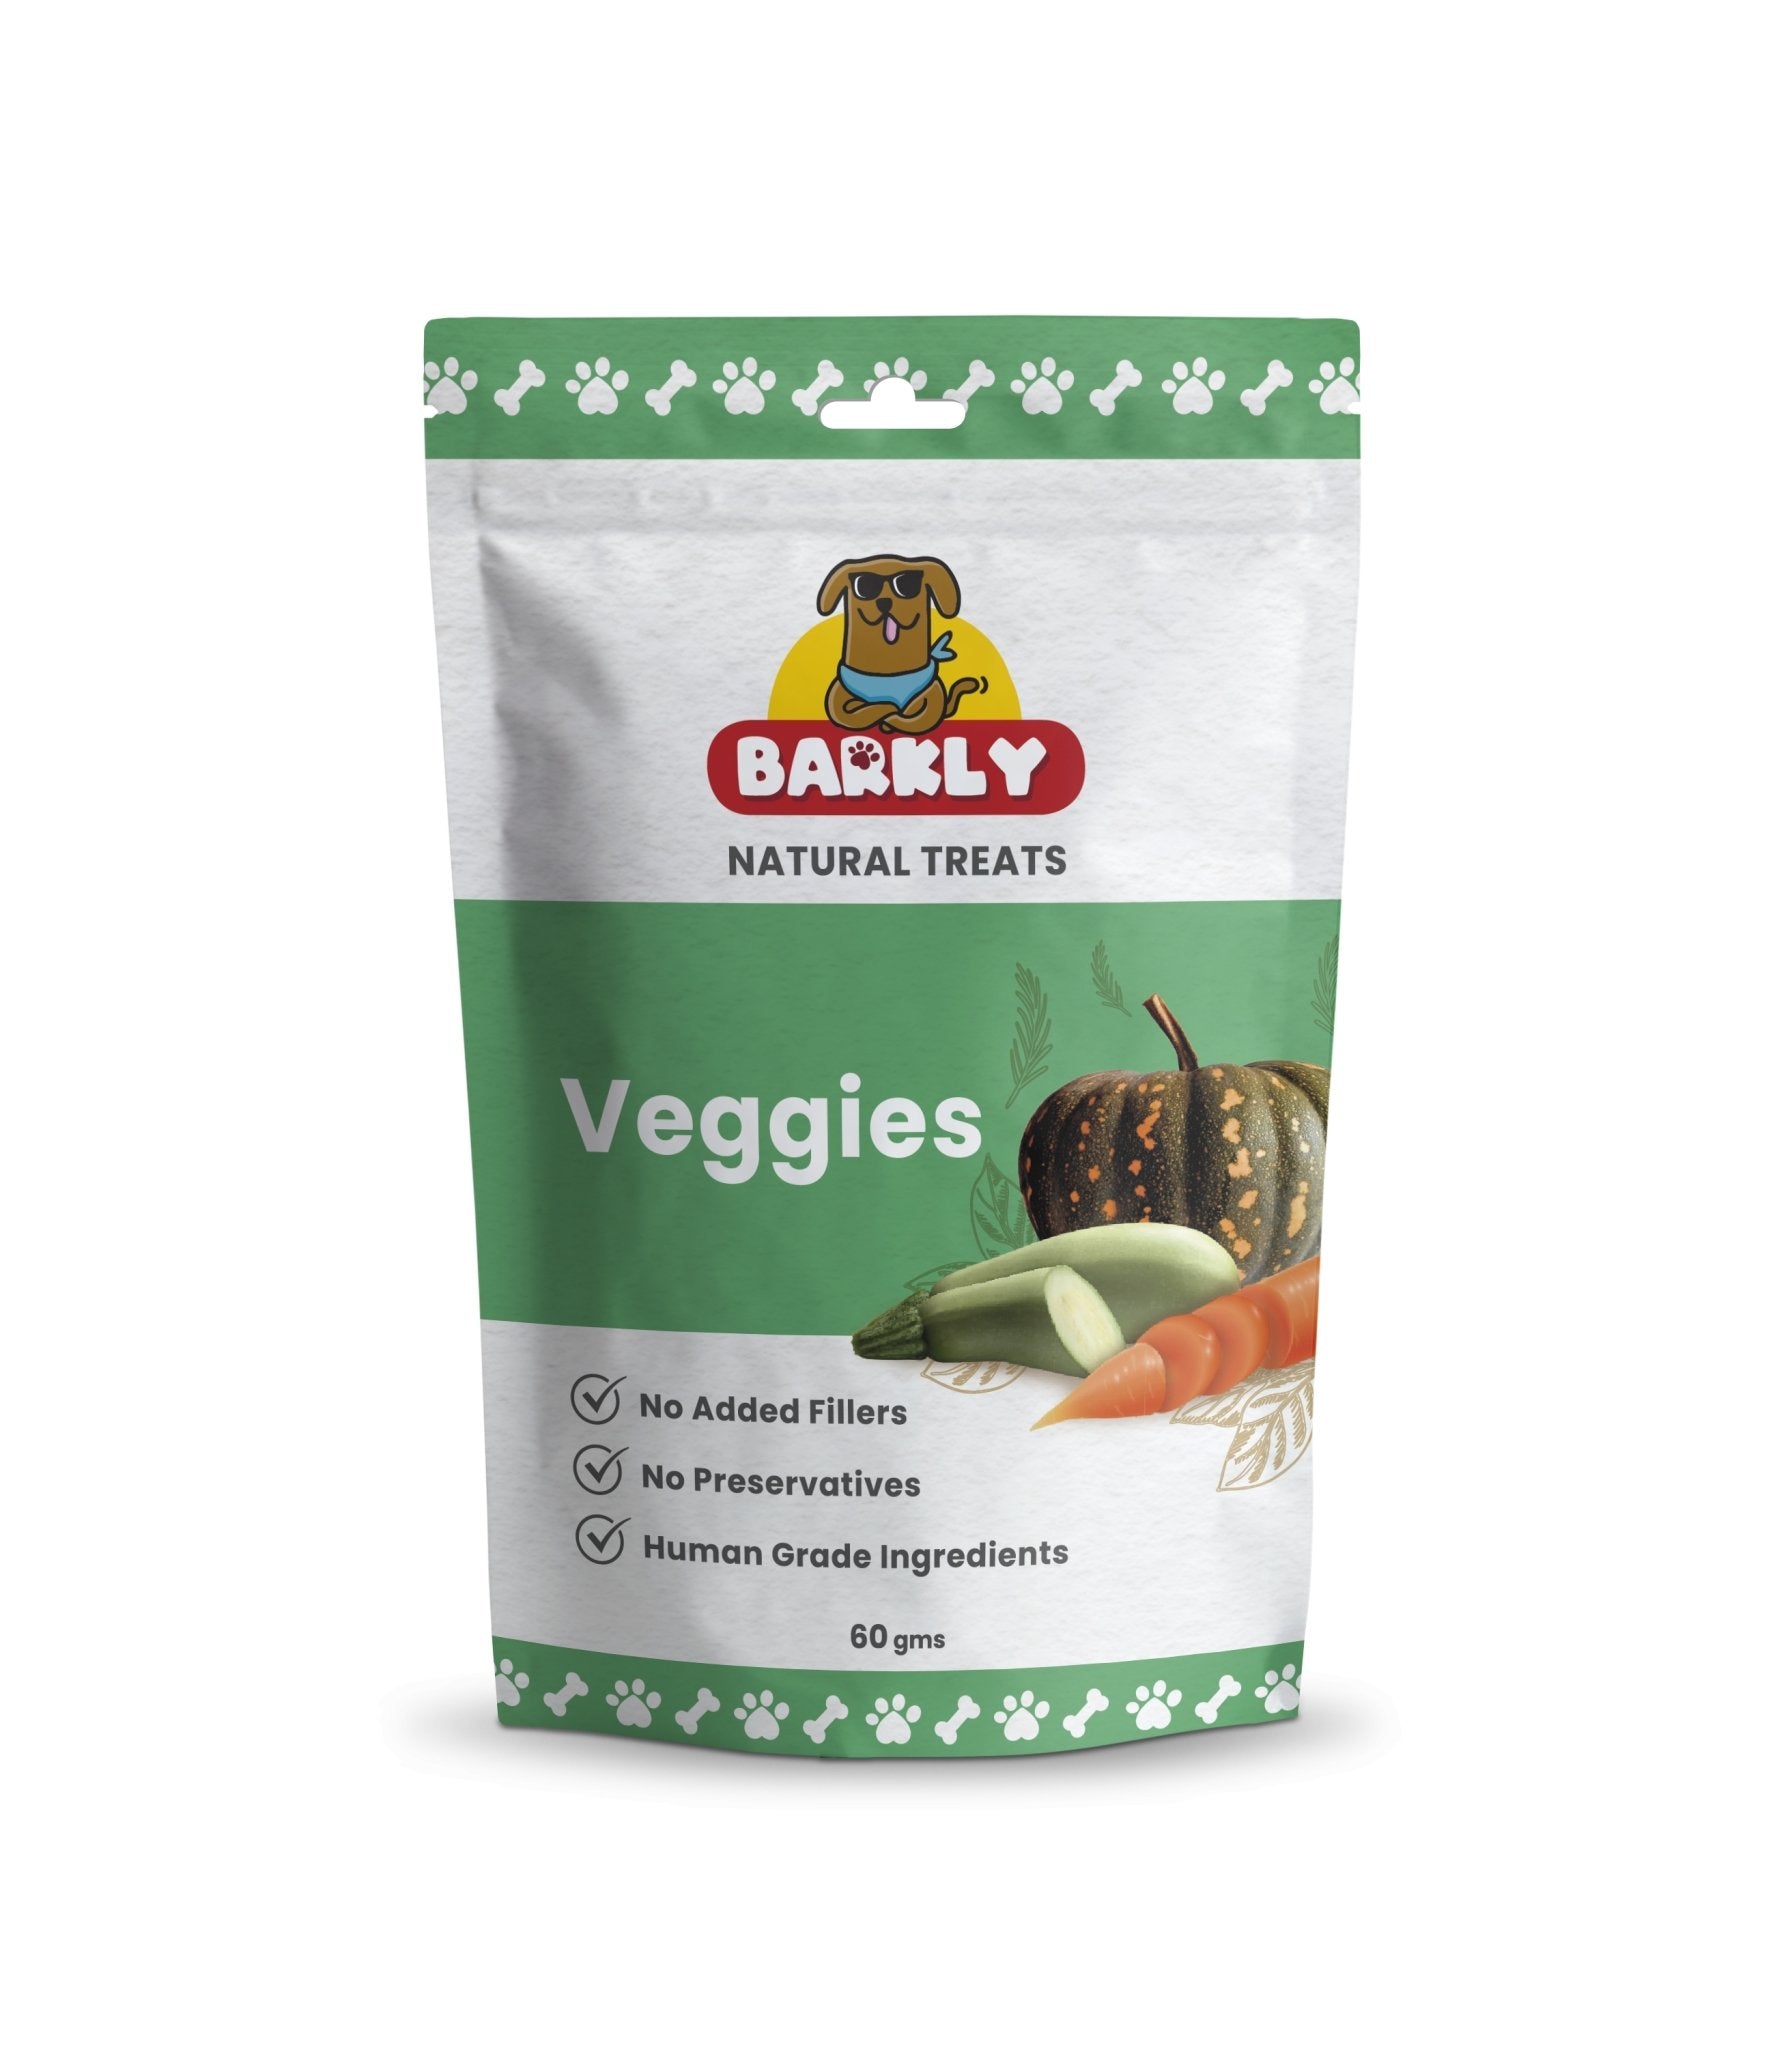 A package of 'Veggies' brand dog treats with assorted vegetable flavors